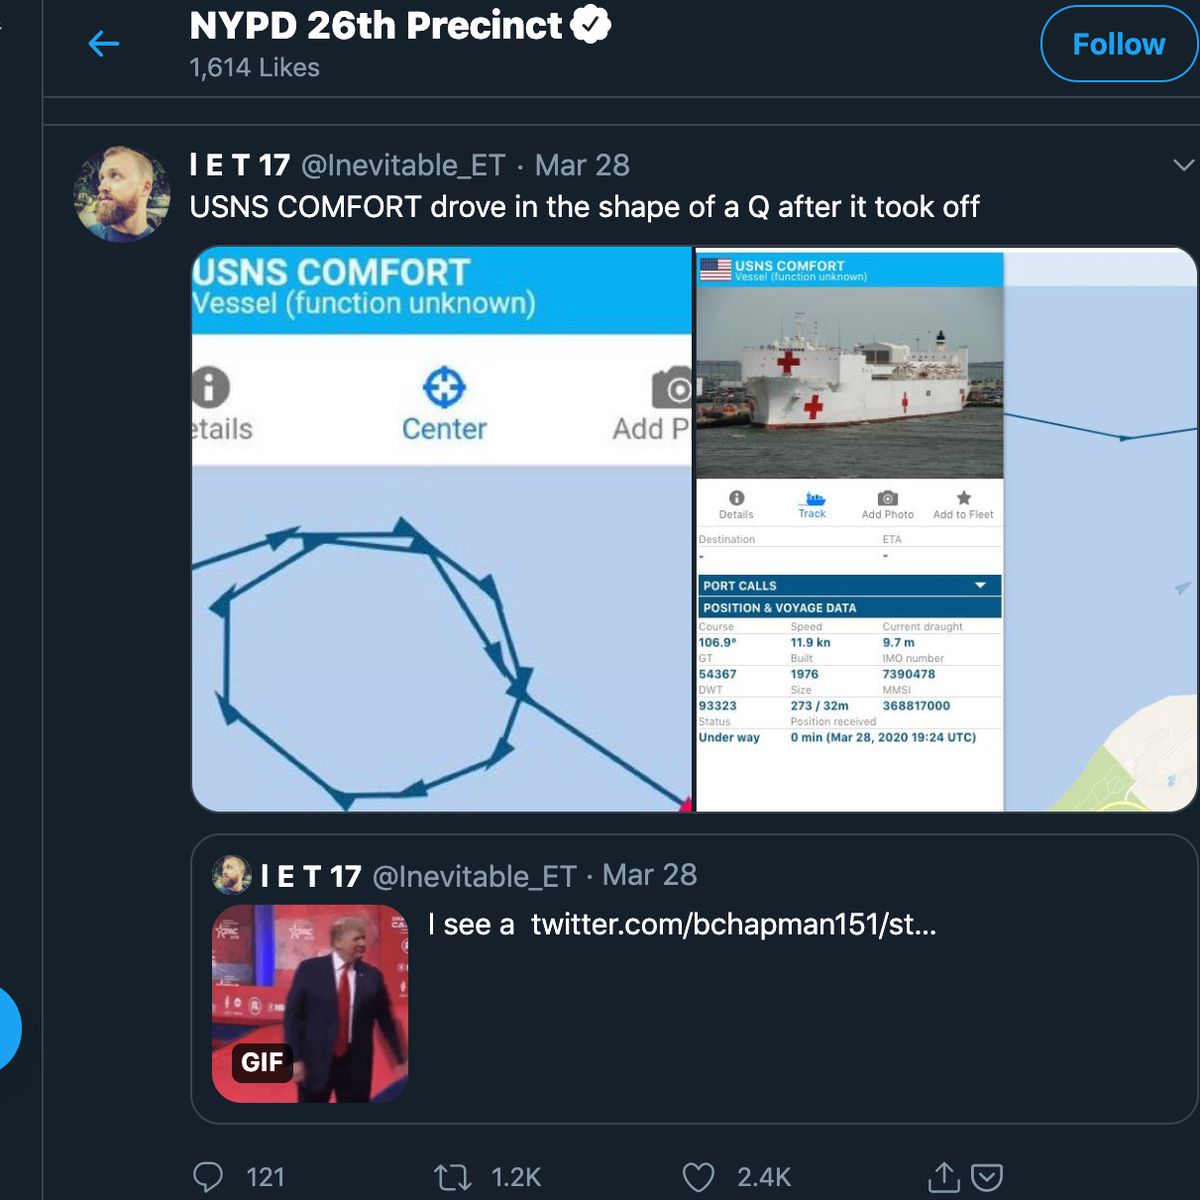 The NYPD’s 26th Precinct Twitter account liked several conspiracy-tinged tweets.